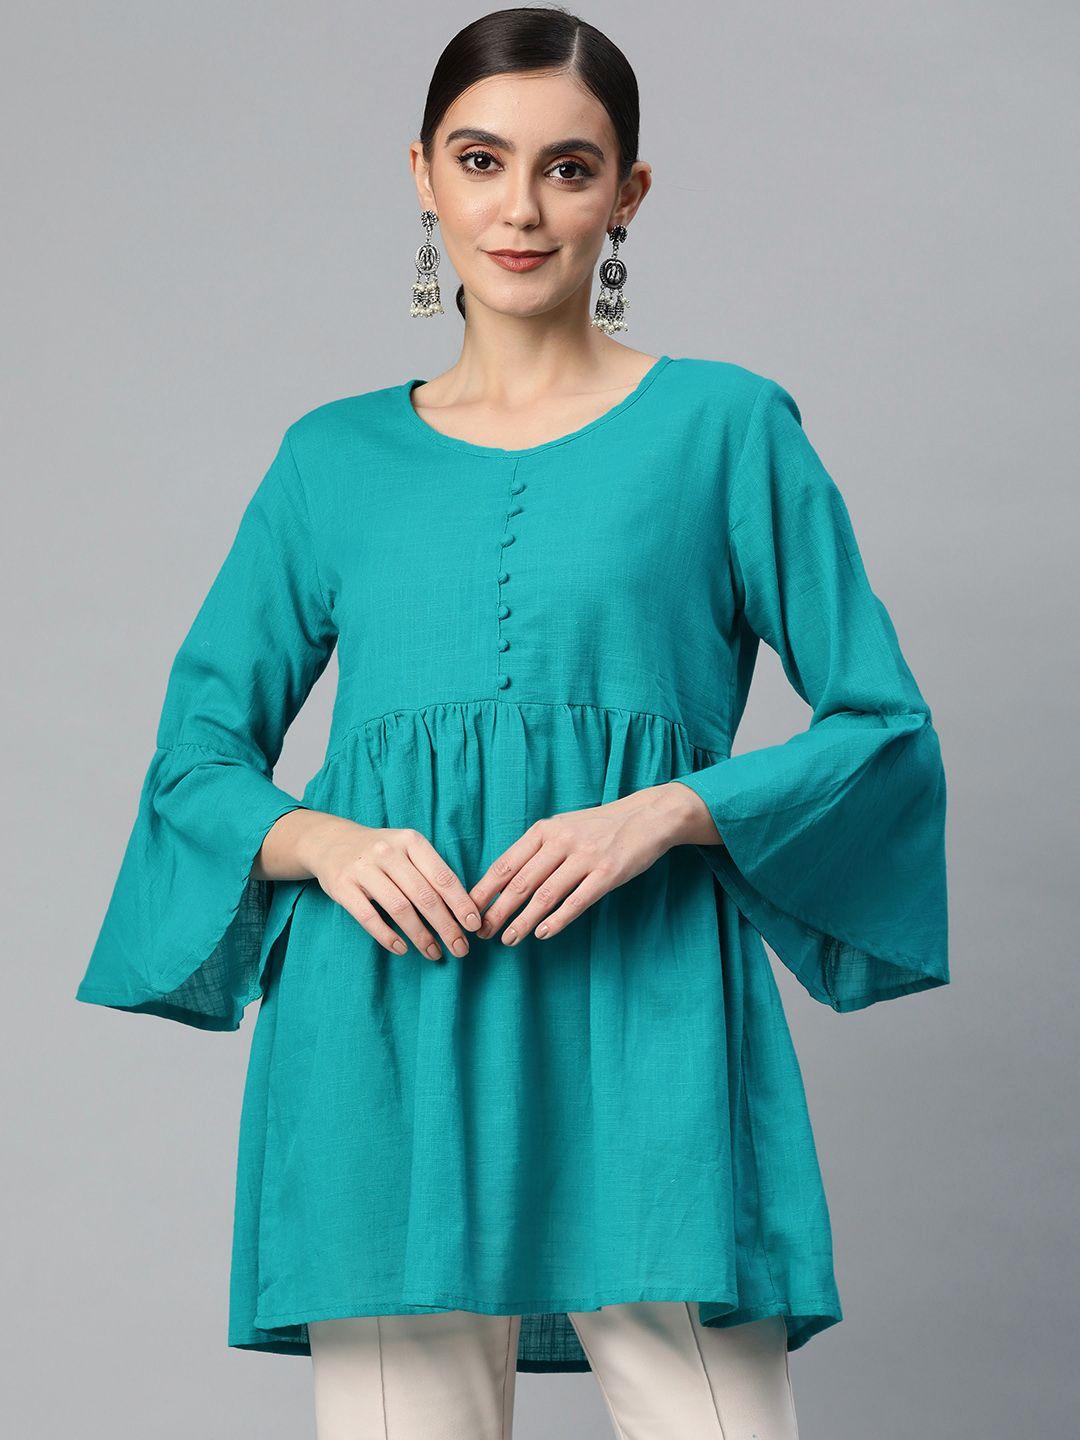 SVARCHI Teal Green Pure Cotton Solid A-Line Top